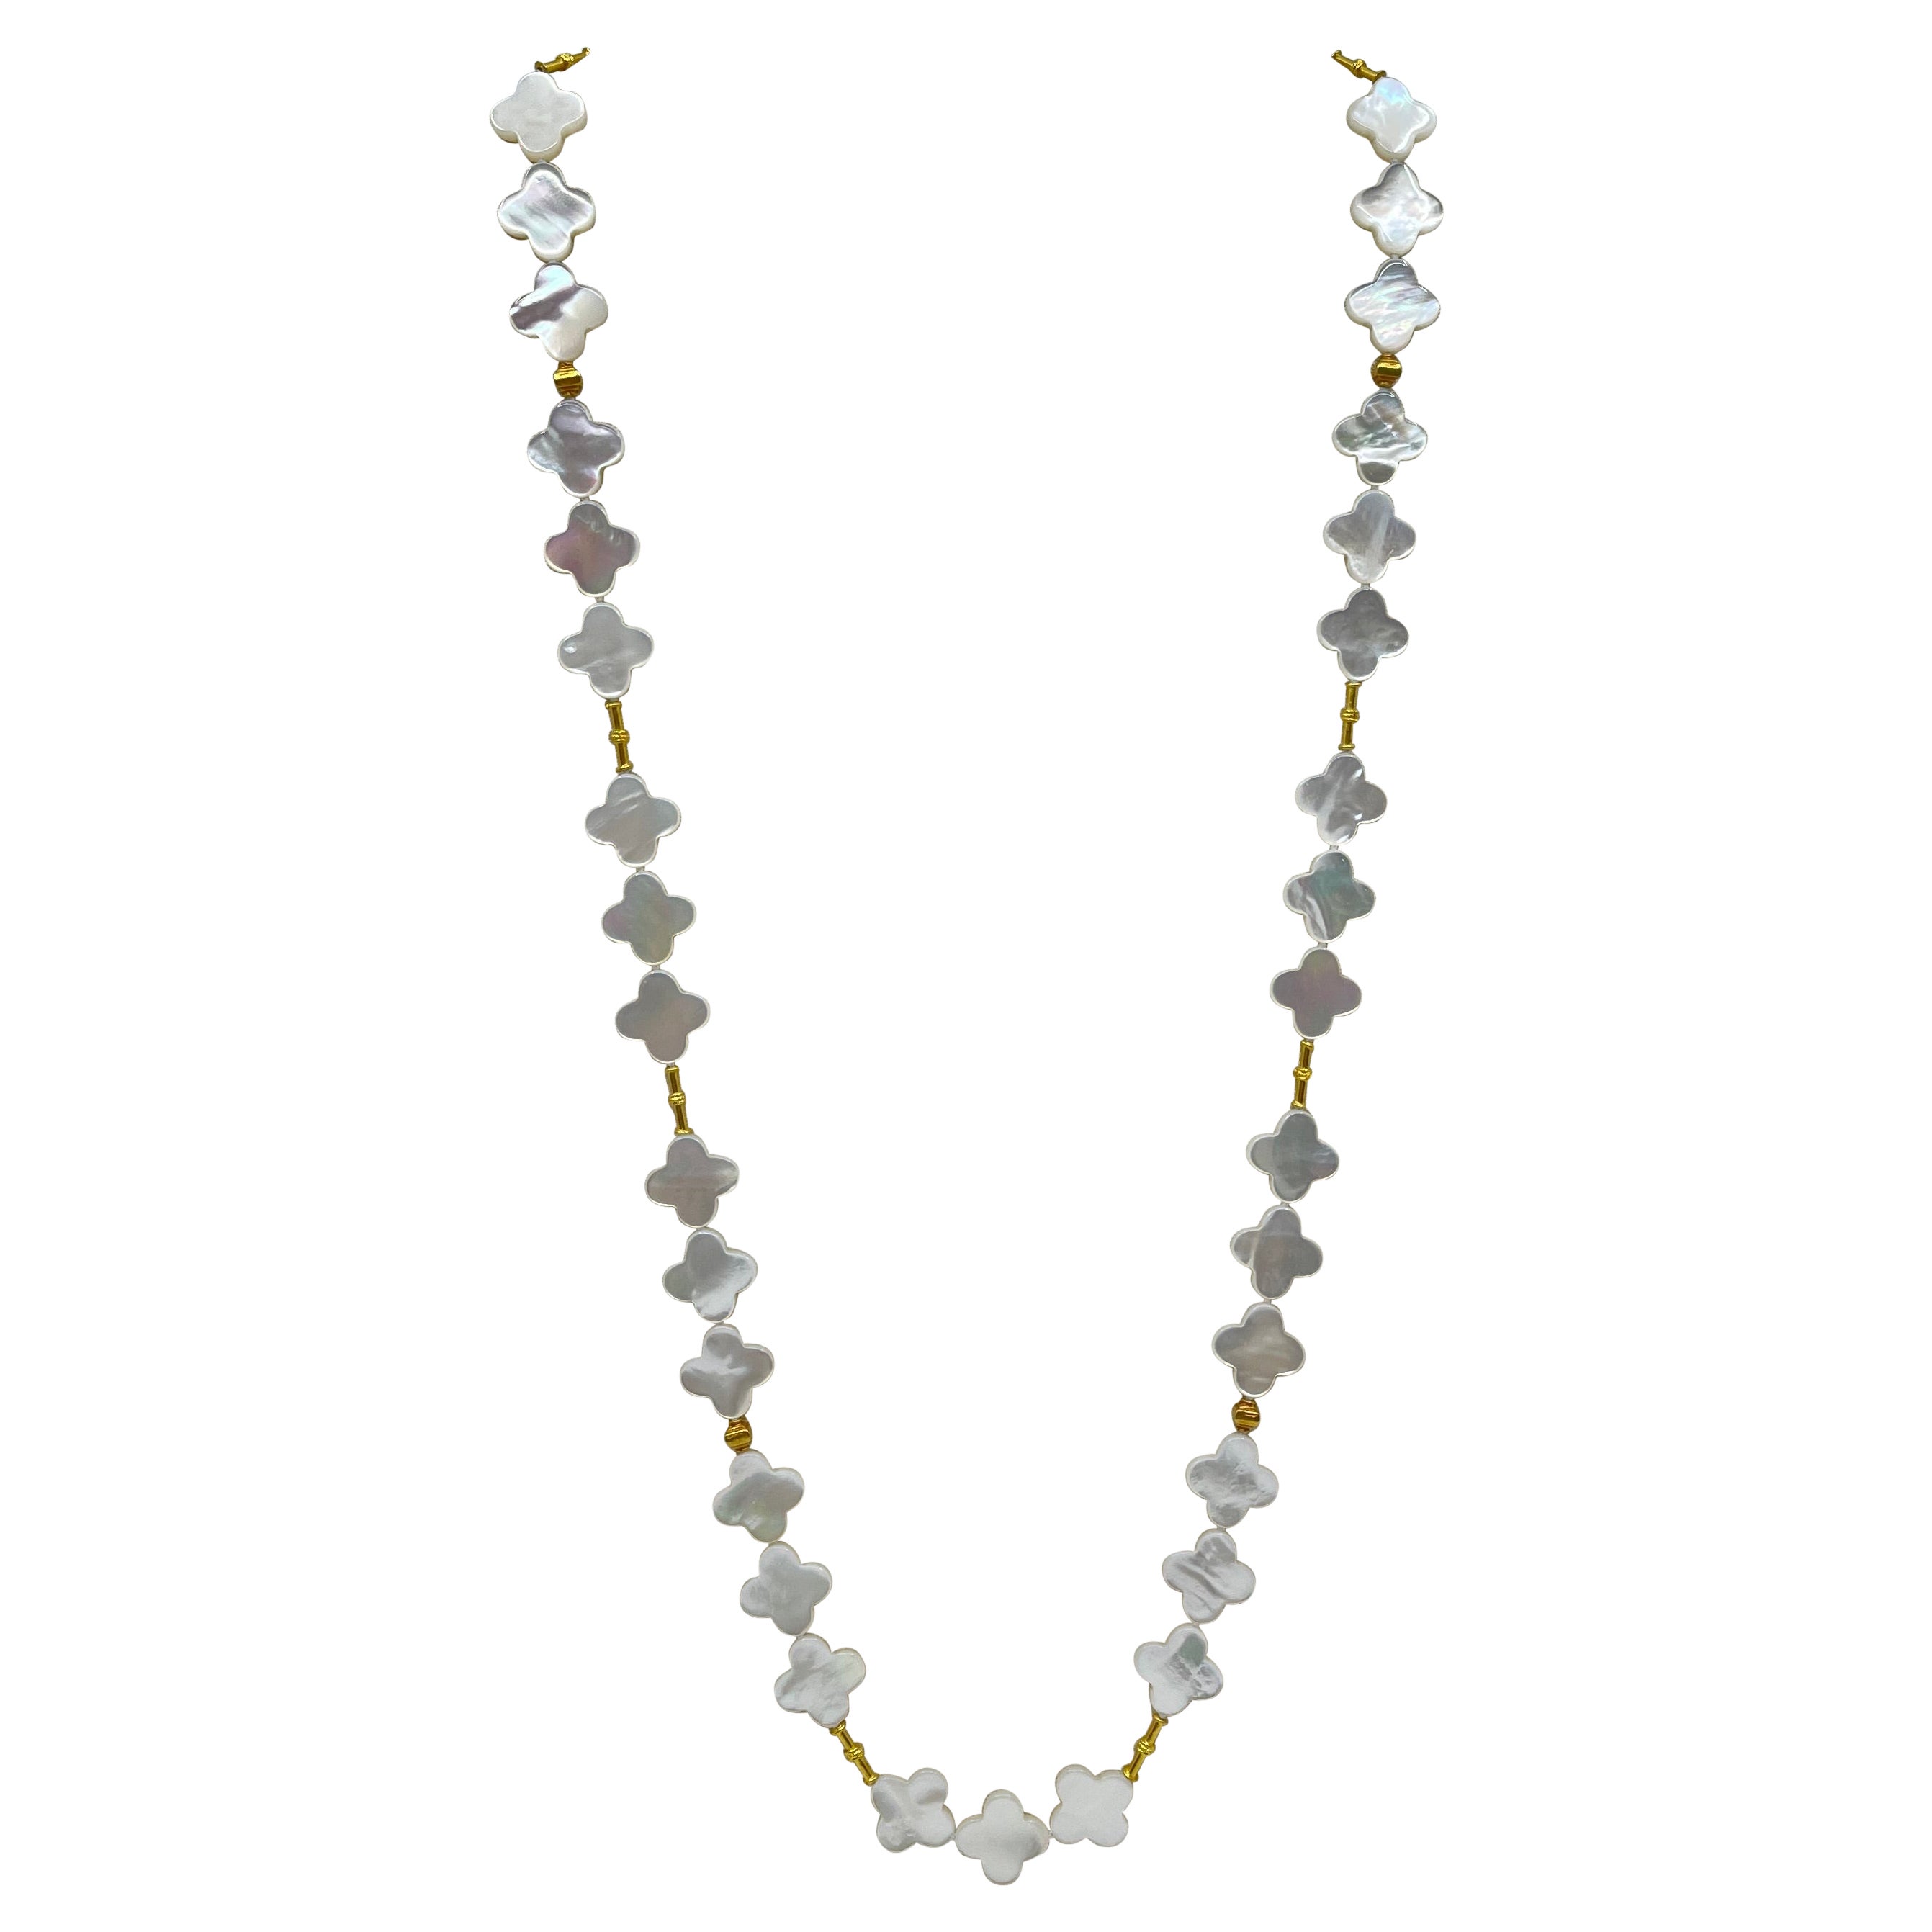 Long Necklace with Mother-of-Pearl & 18K Solid Gold Beads